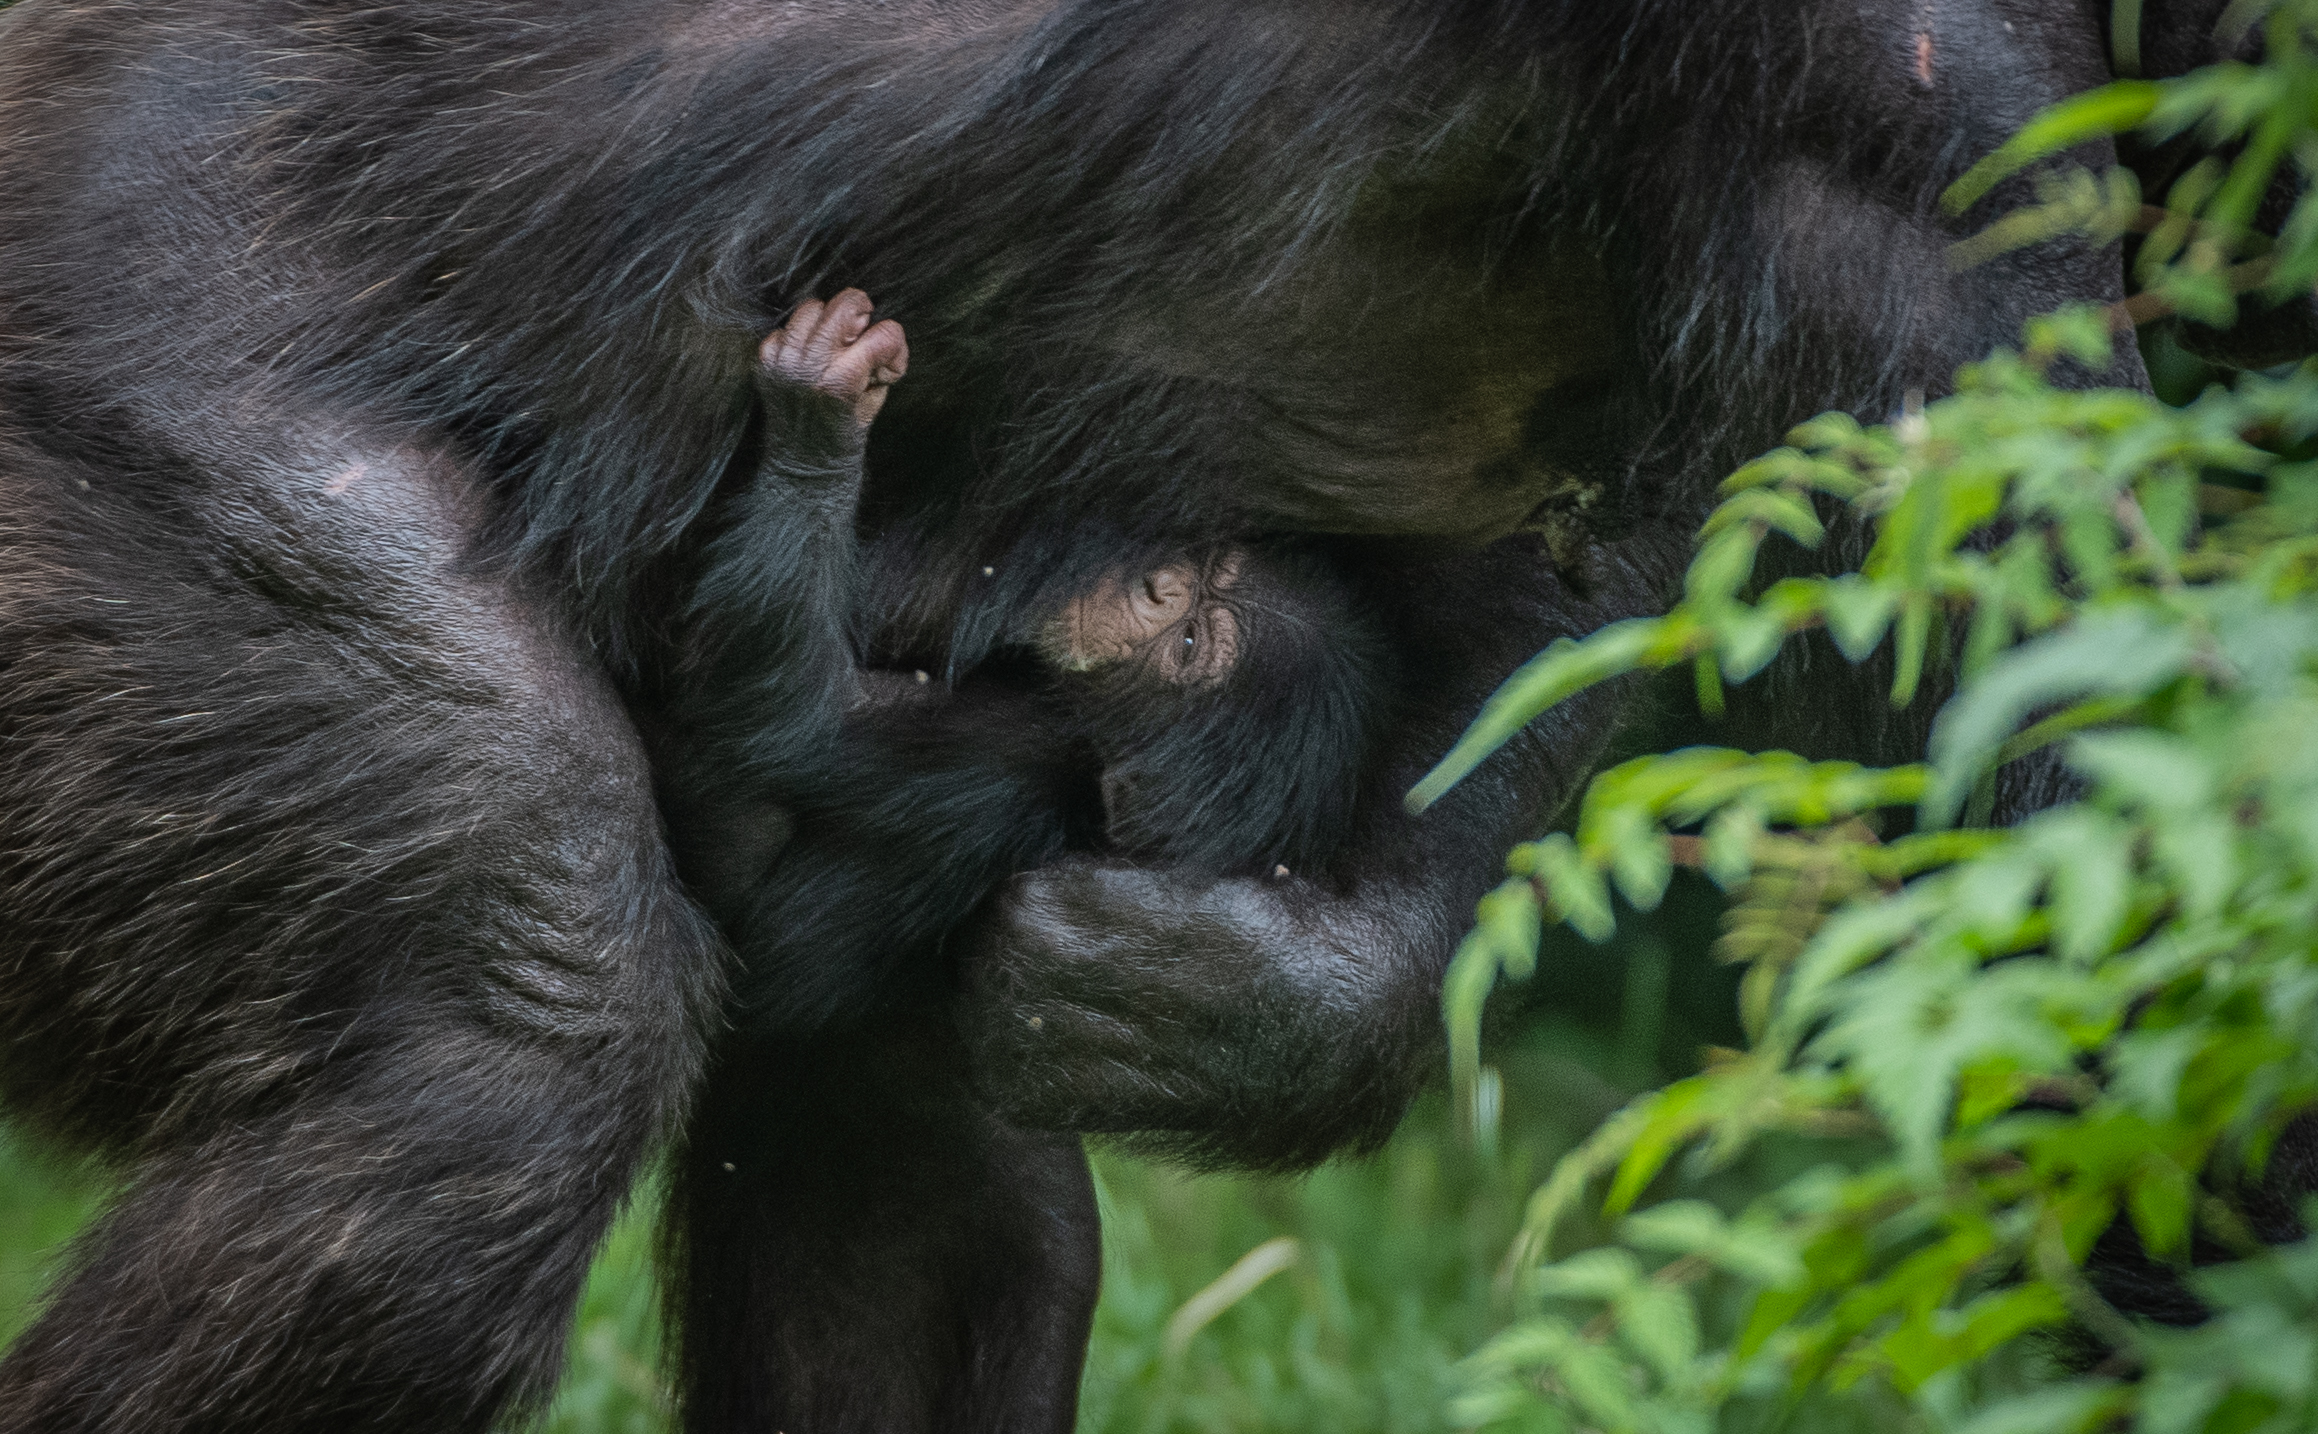 The endangered chimp was born in front of zoo visitors (Chester Zoo/PA)